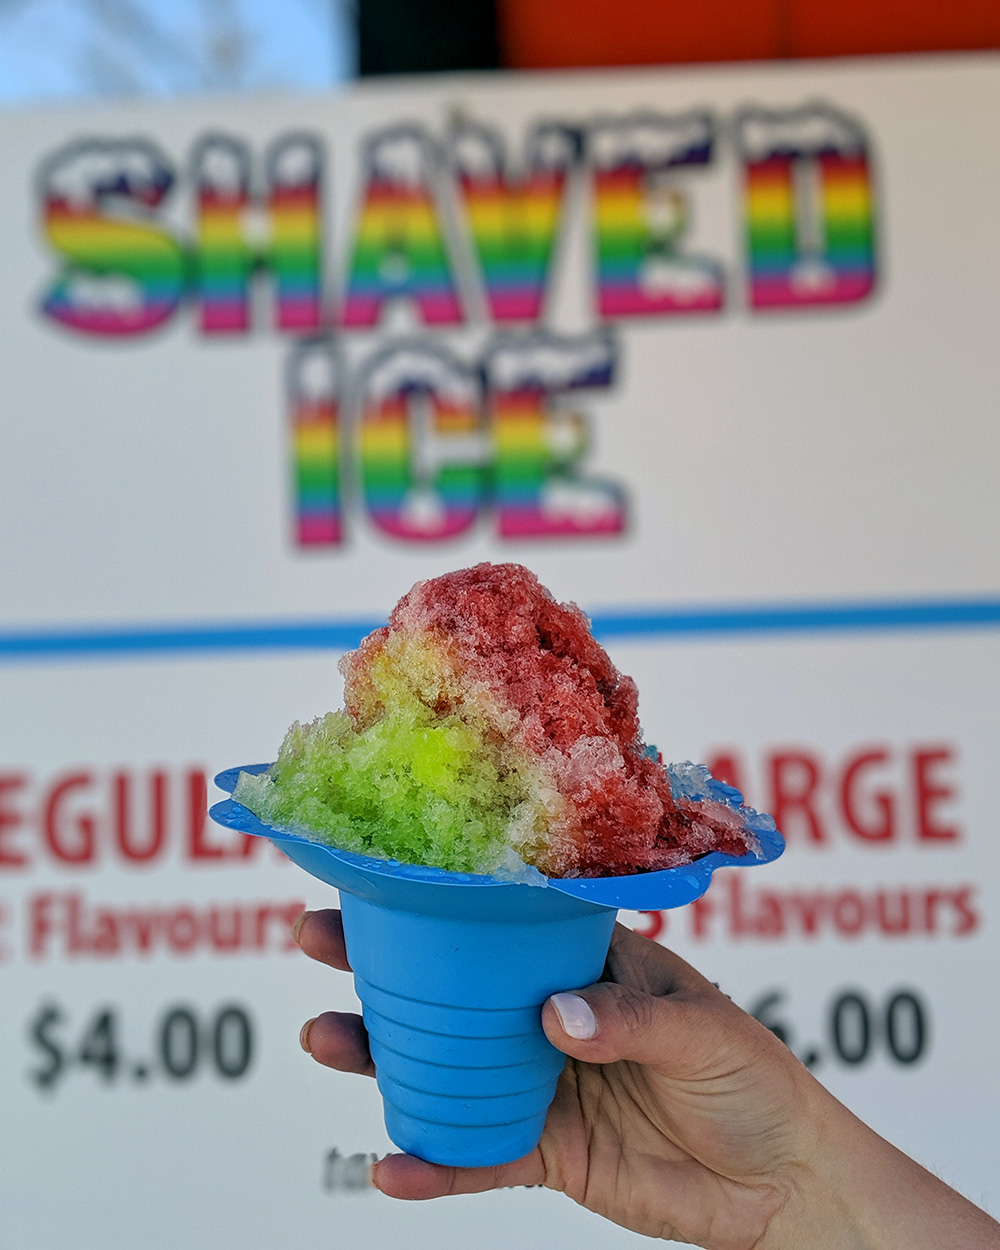 shaved ice cup is held up in front of the shaved ice menu sign